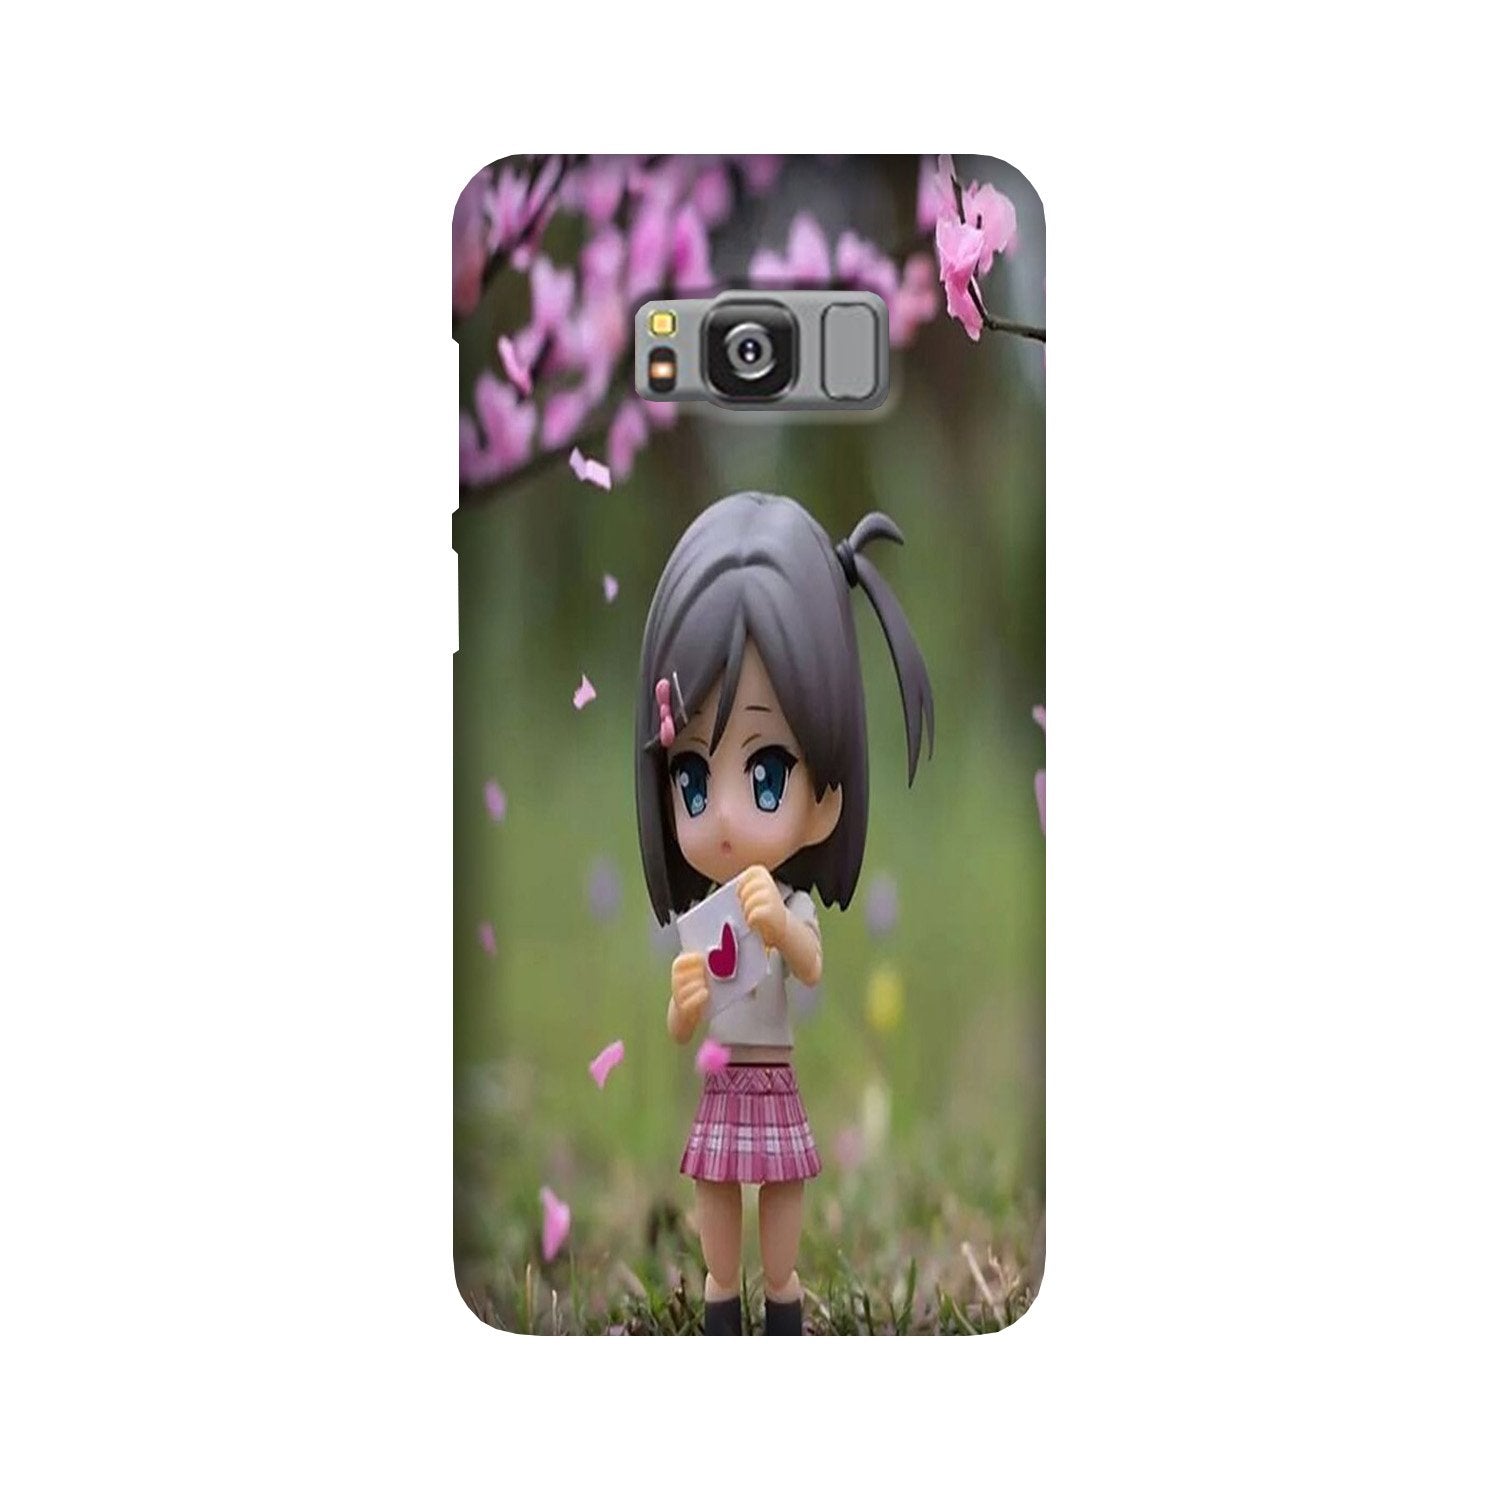 Cute Girl Case for Galaxy S8 Plus